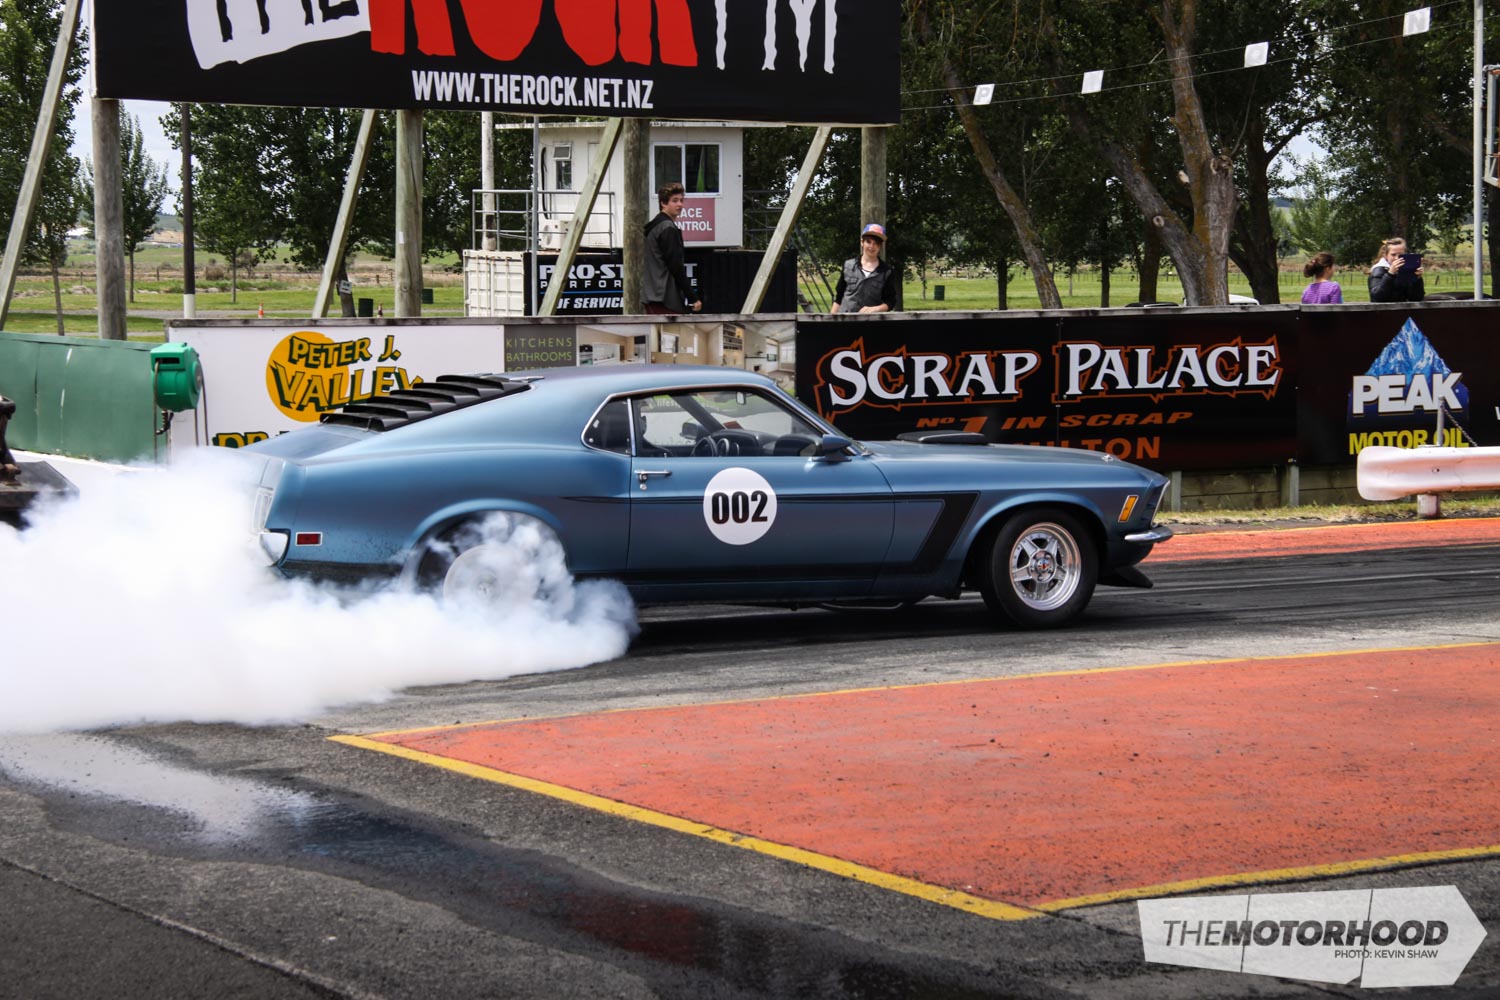   Ray Peterson in a strong sounding Mustang running 11.0’s launching hard on the rev limiter every pass.  